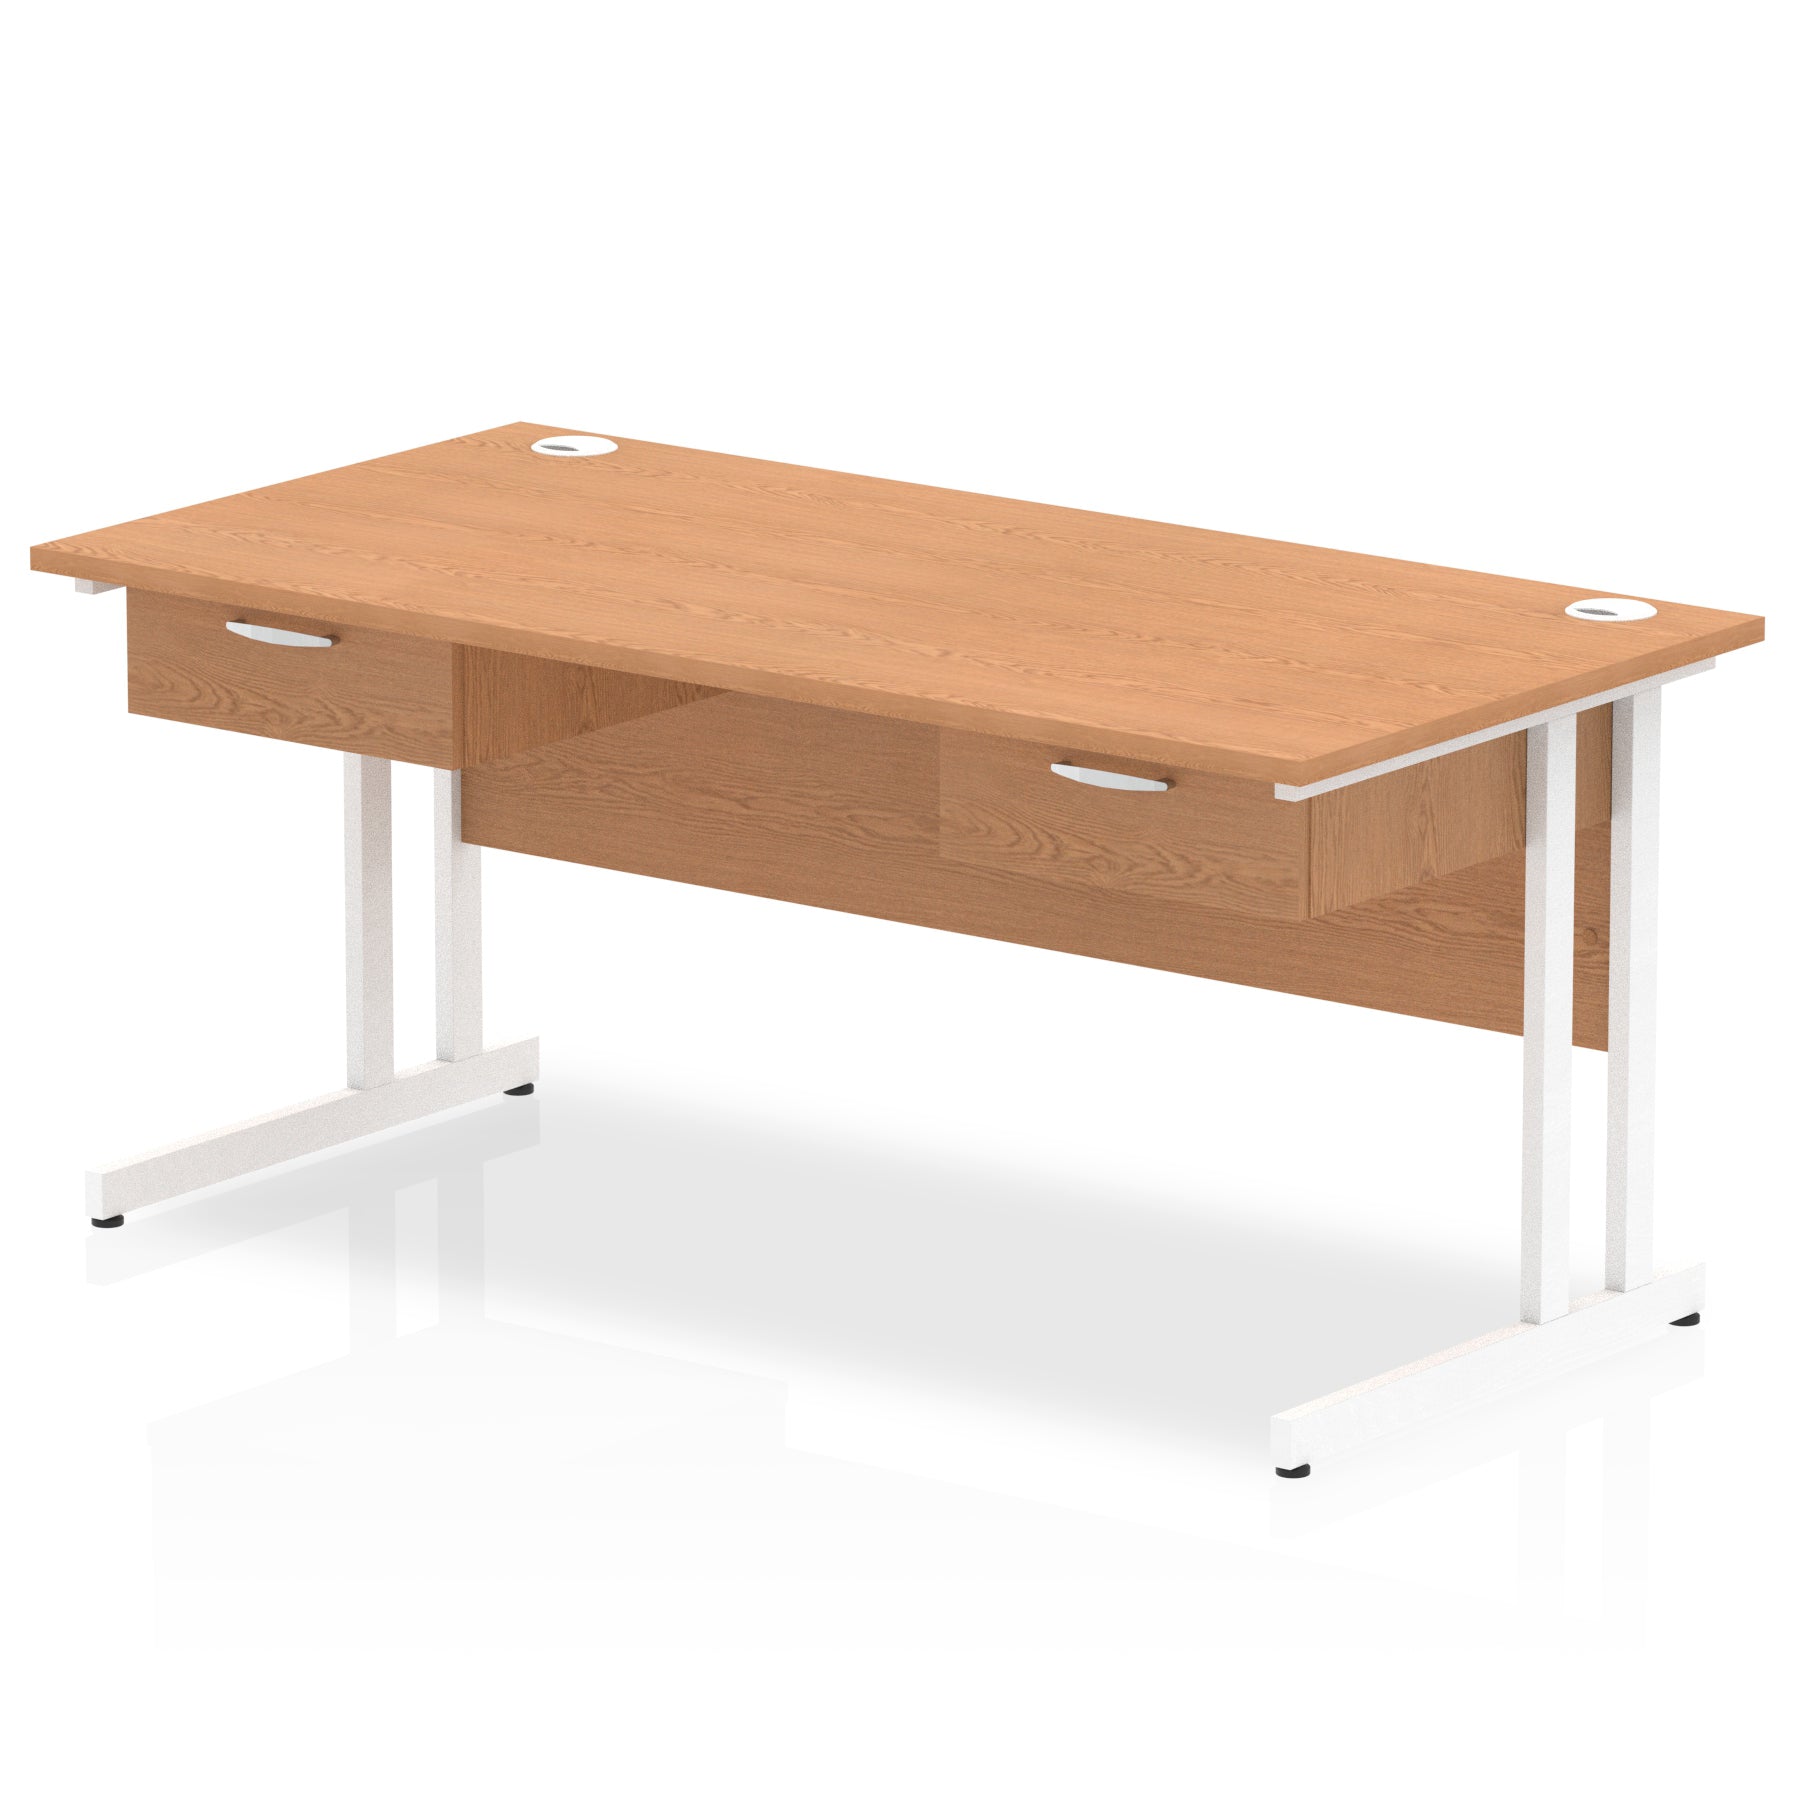 Impulse Cantilever Straight Desk White Frame With Two One Drawer Fixed Pedestals